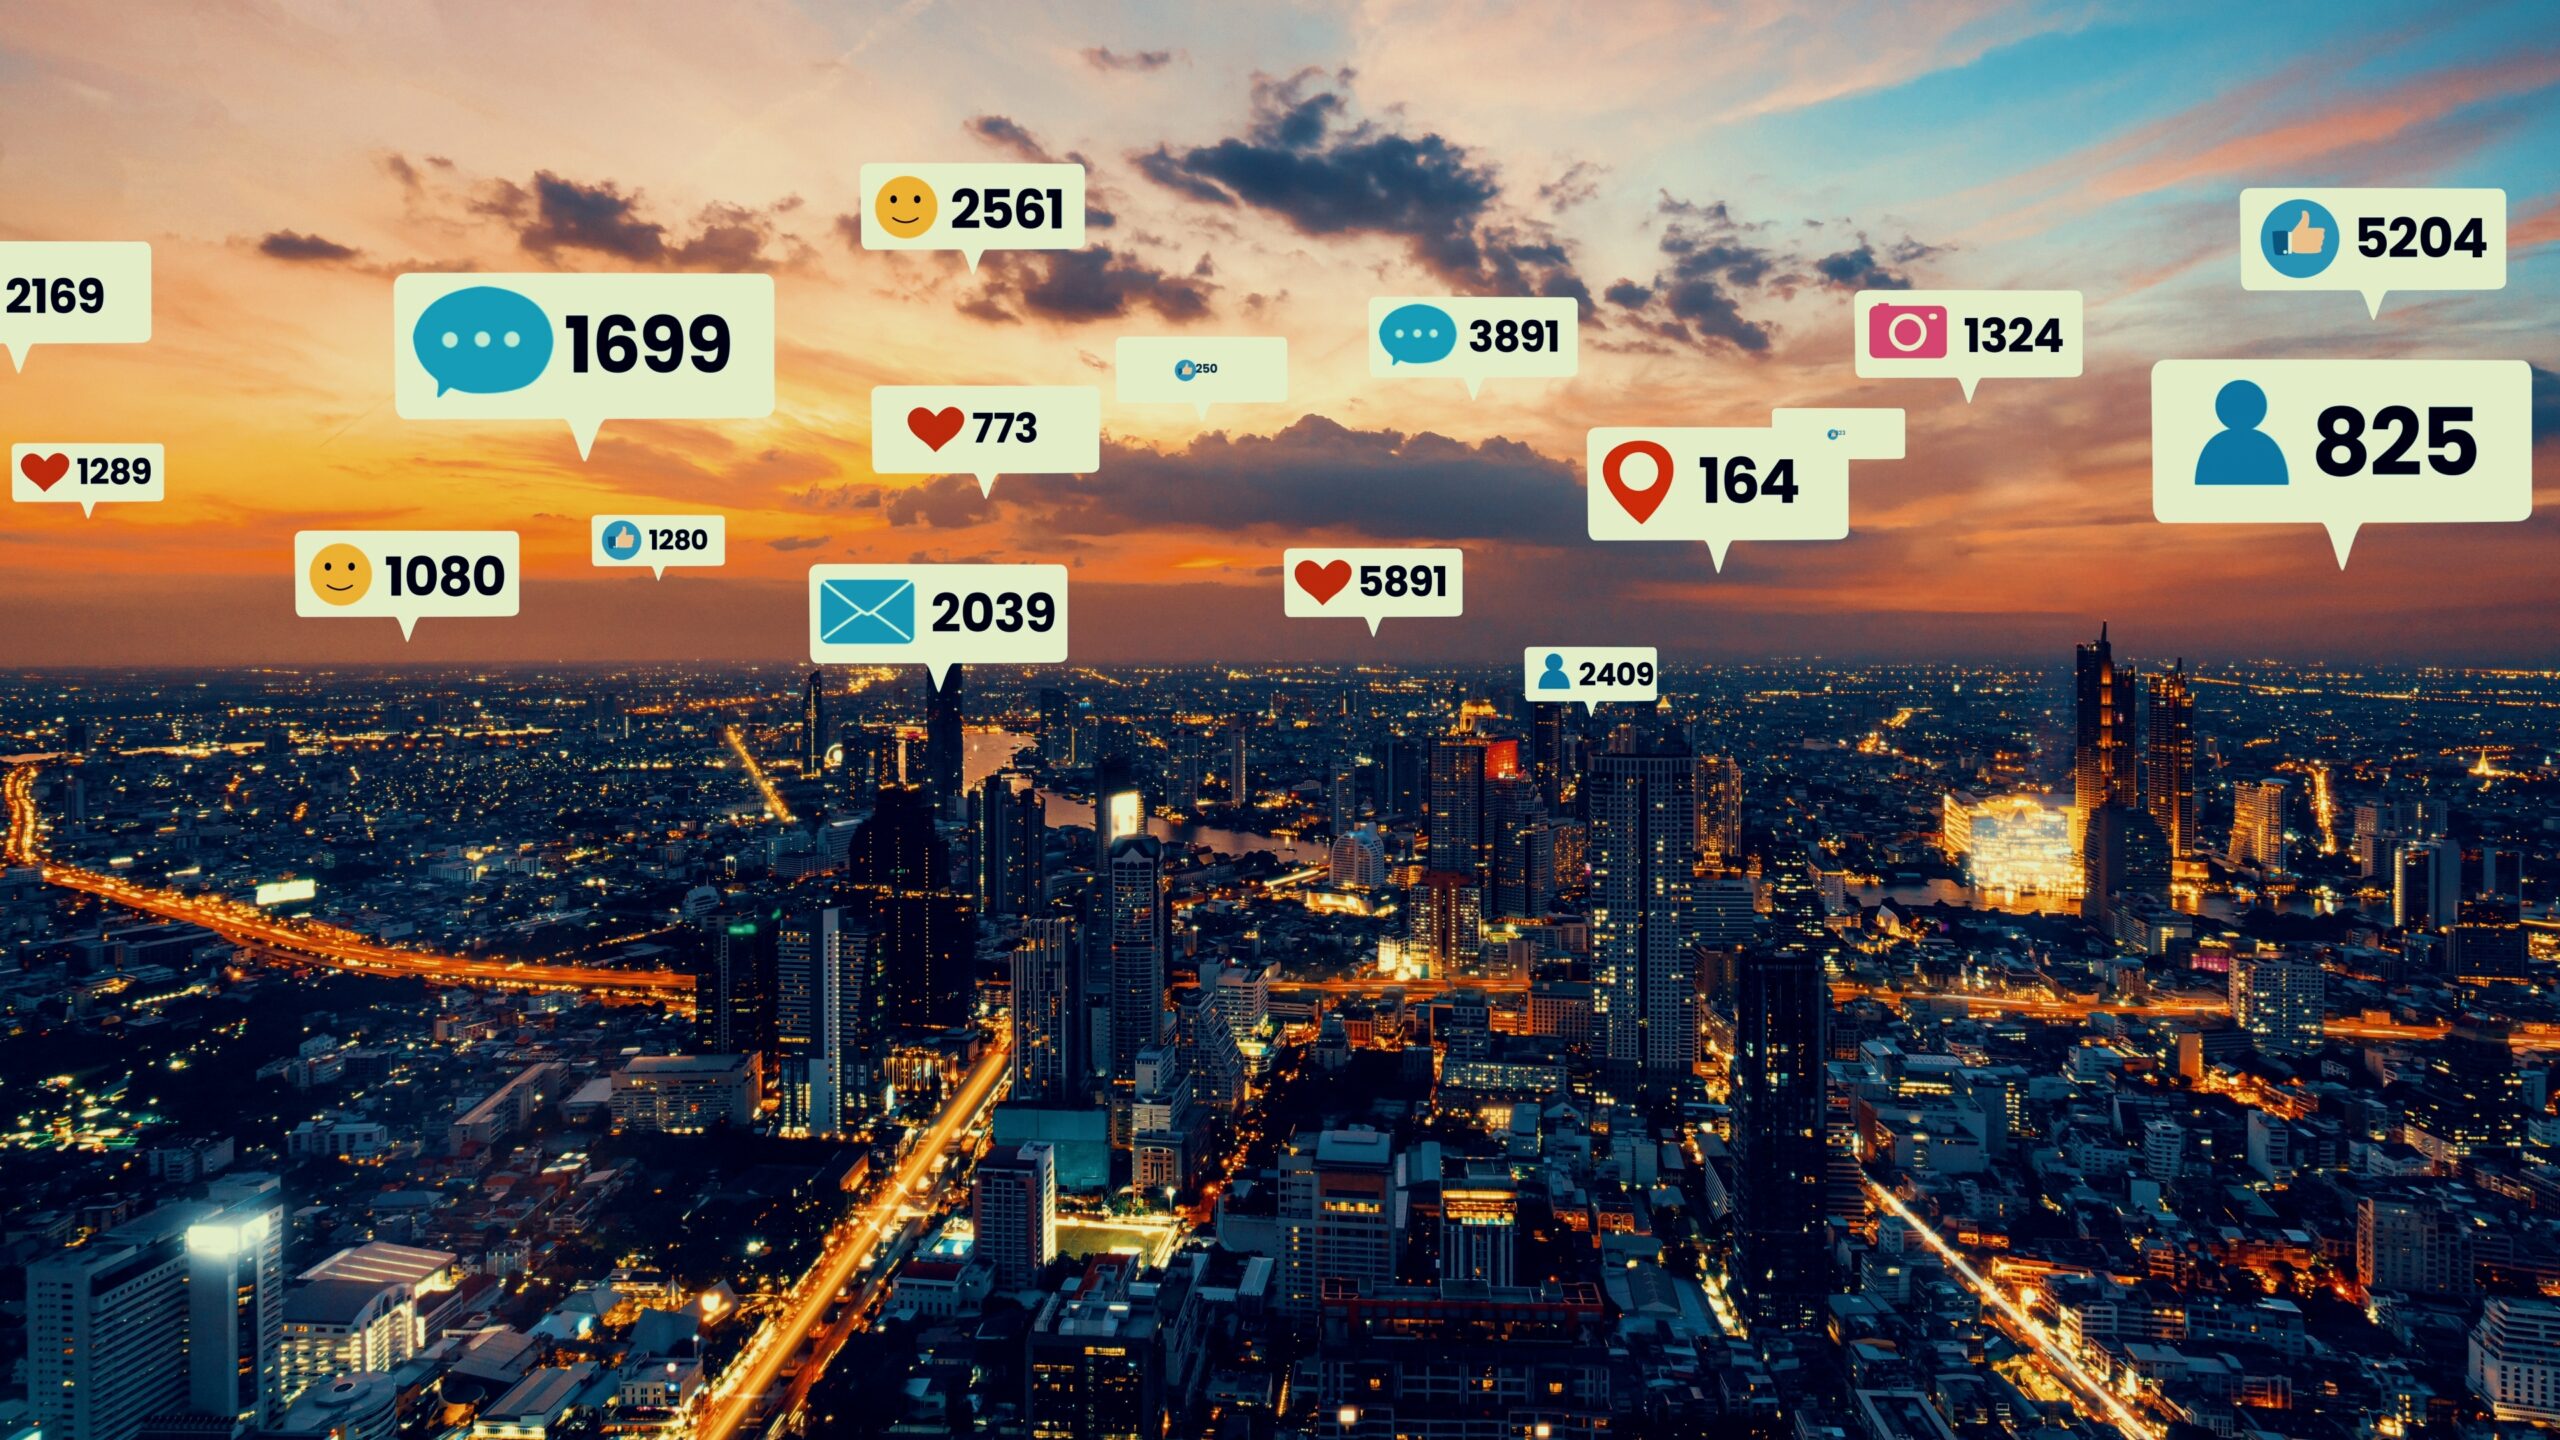 An Image Of A City Skyline With Social Message Bubbles Thought Out The City.  